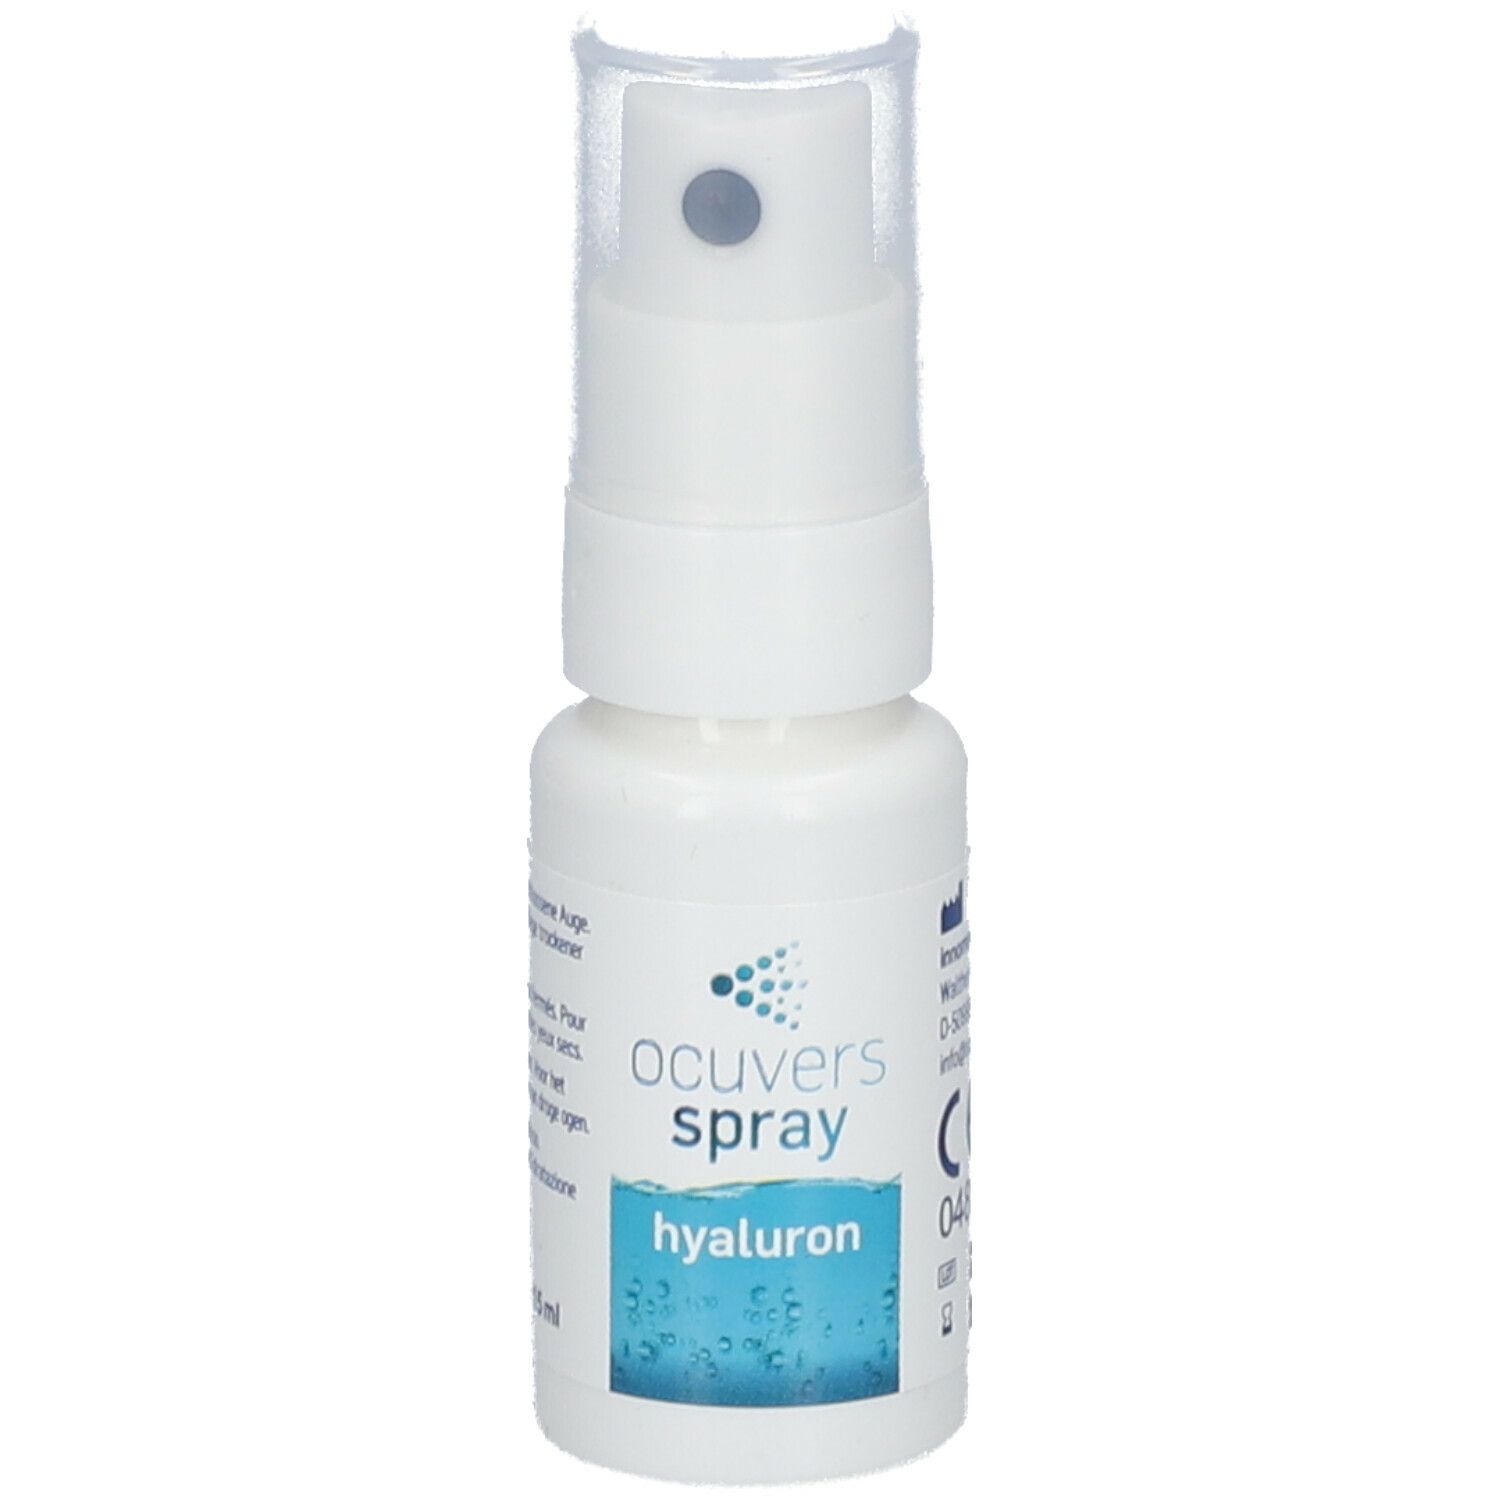 Image of ocuvers spray hyaluron Augenspray